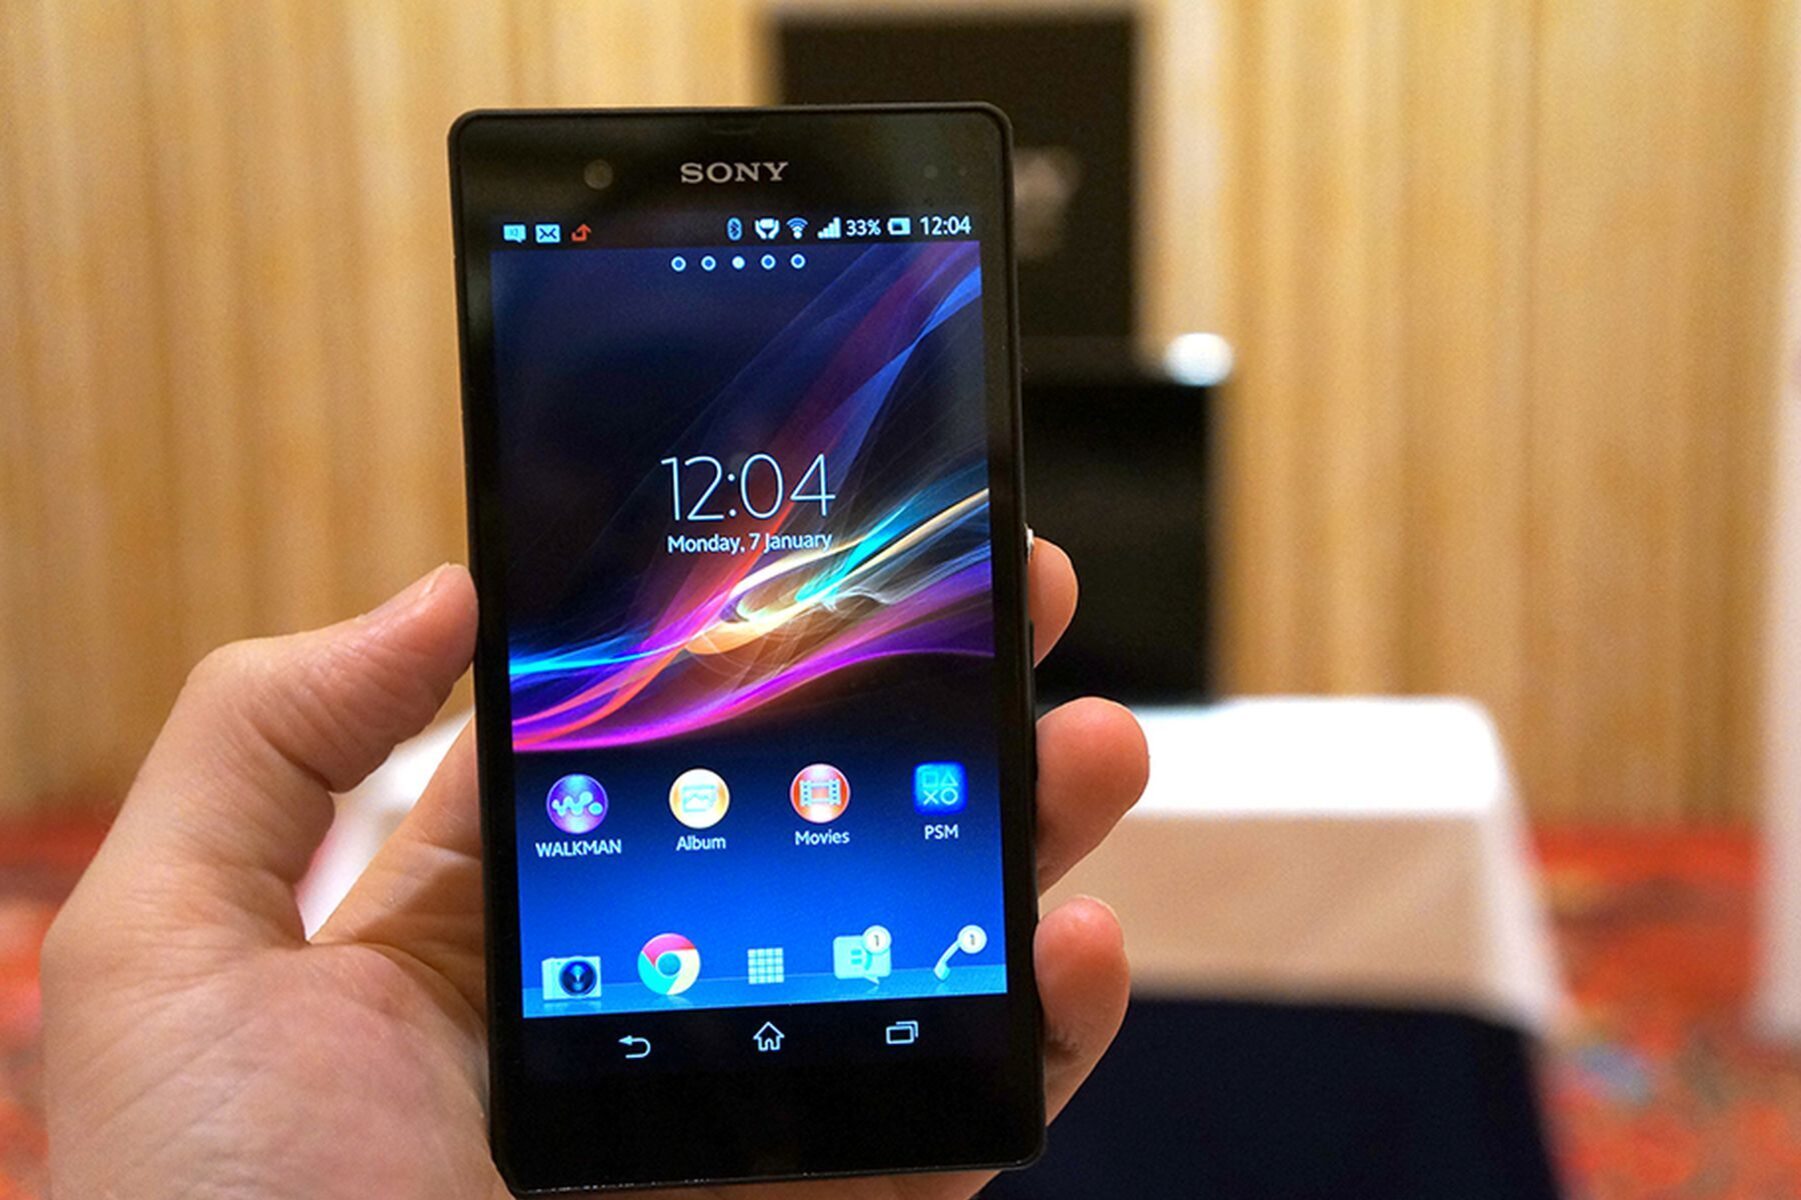 Updating Android Version On Xperia Z: Complete Guide